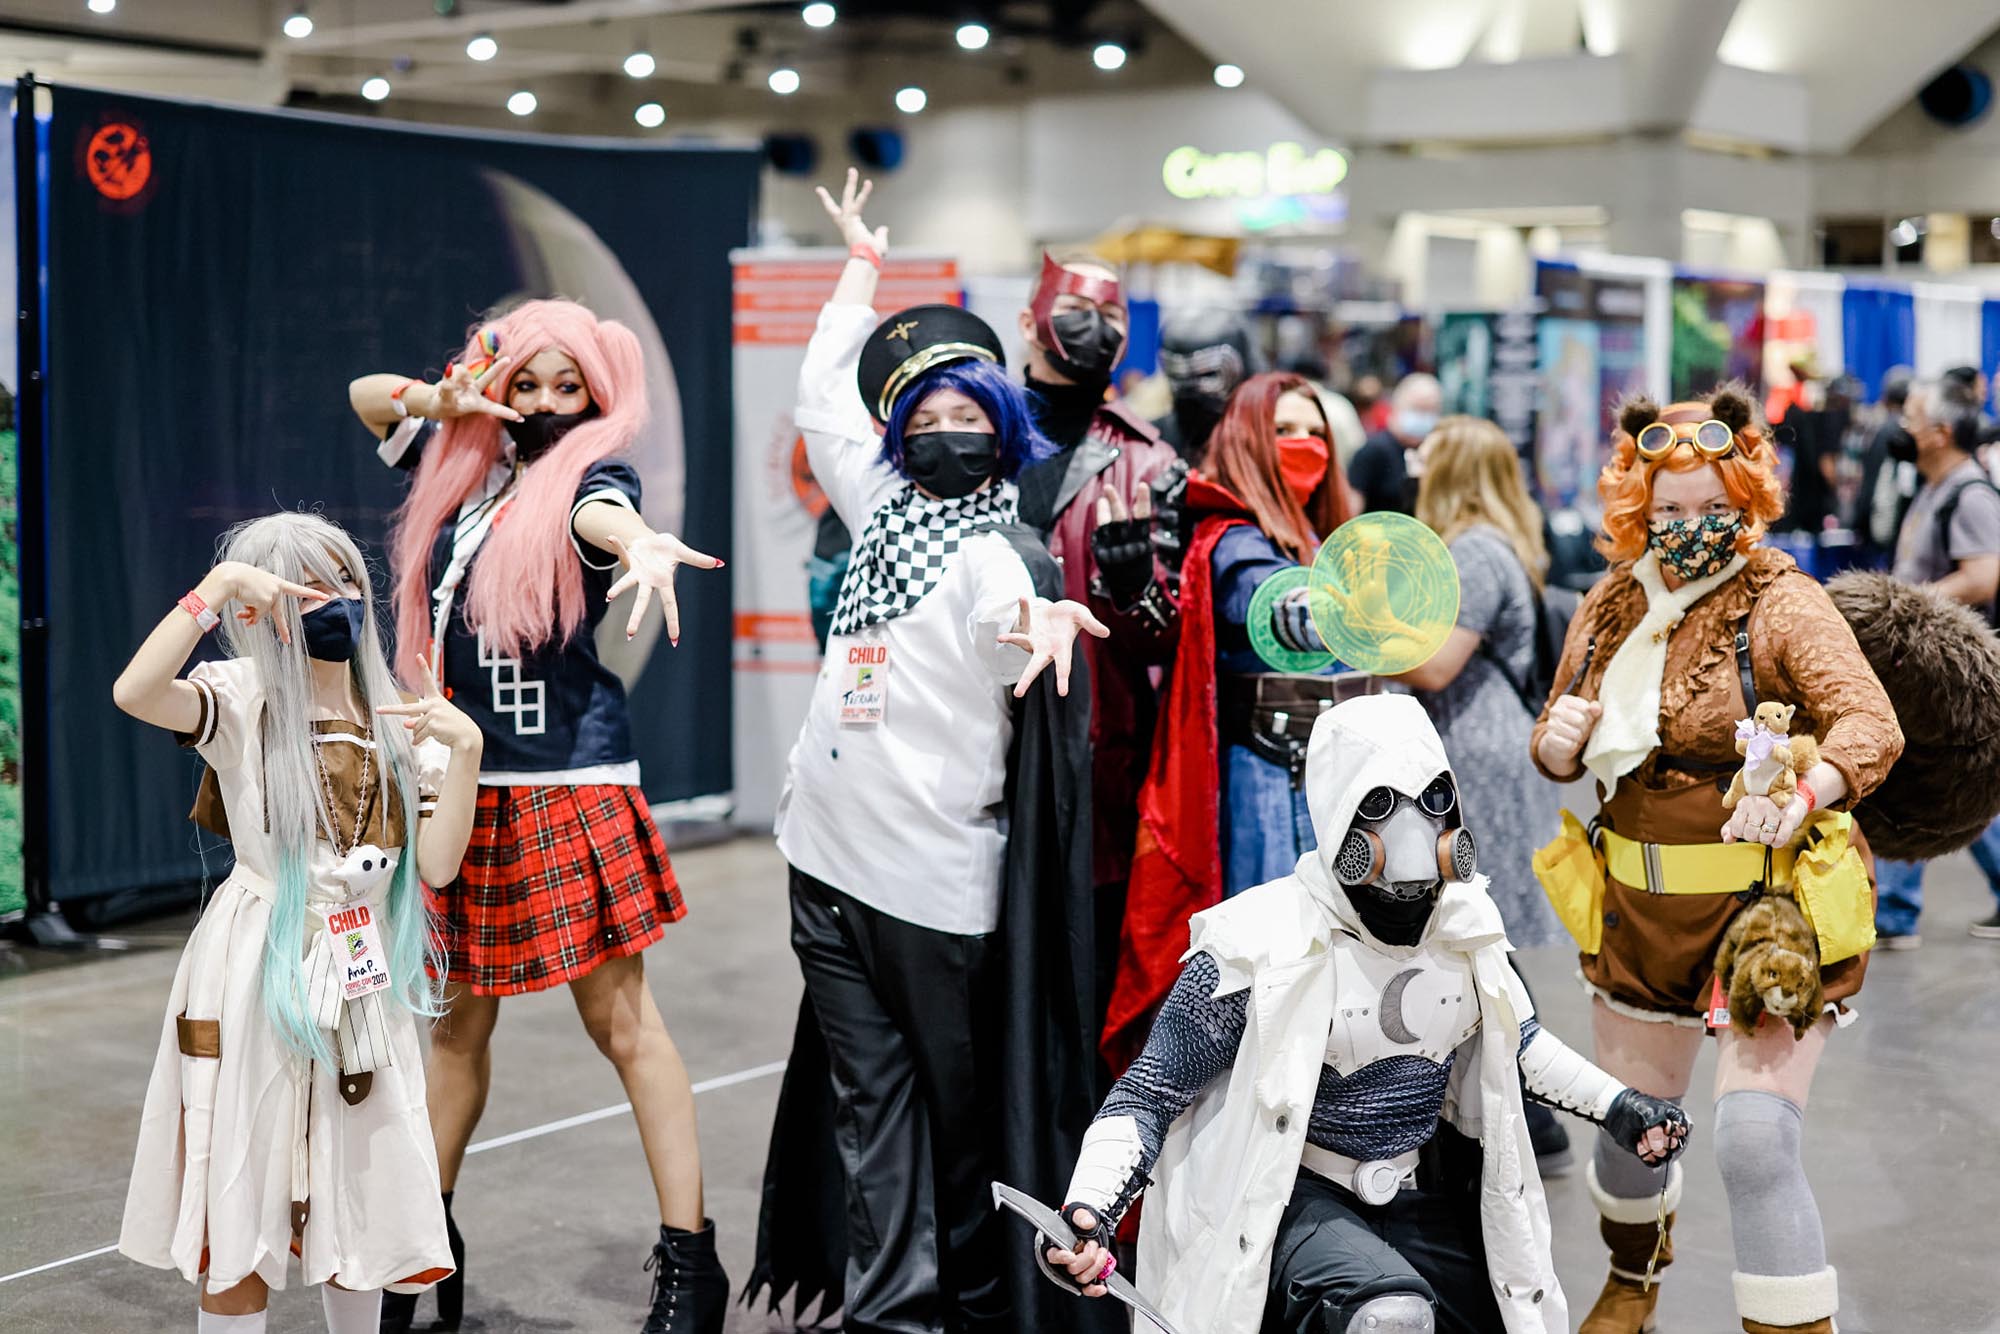 A group of Cosplayers attending the Comic-Con Special Edition in November 2021. Costumes include Marevel characters Moon Knight and Dr Strange among others.